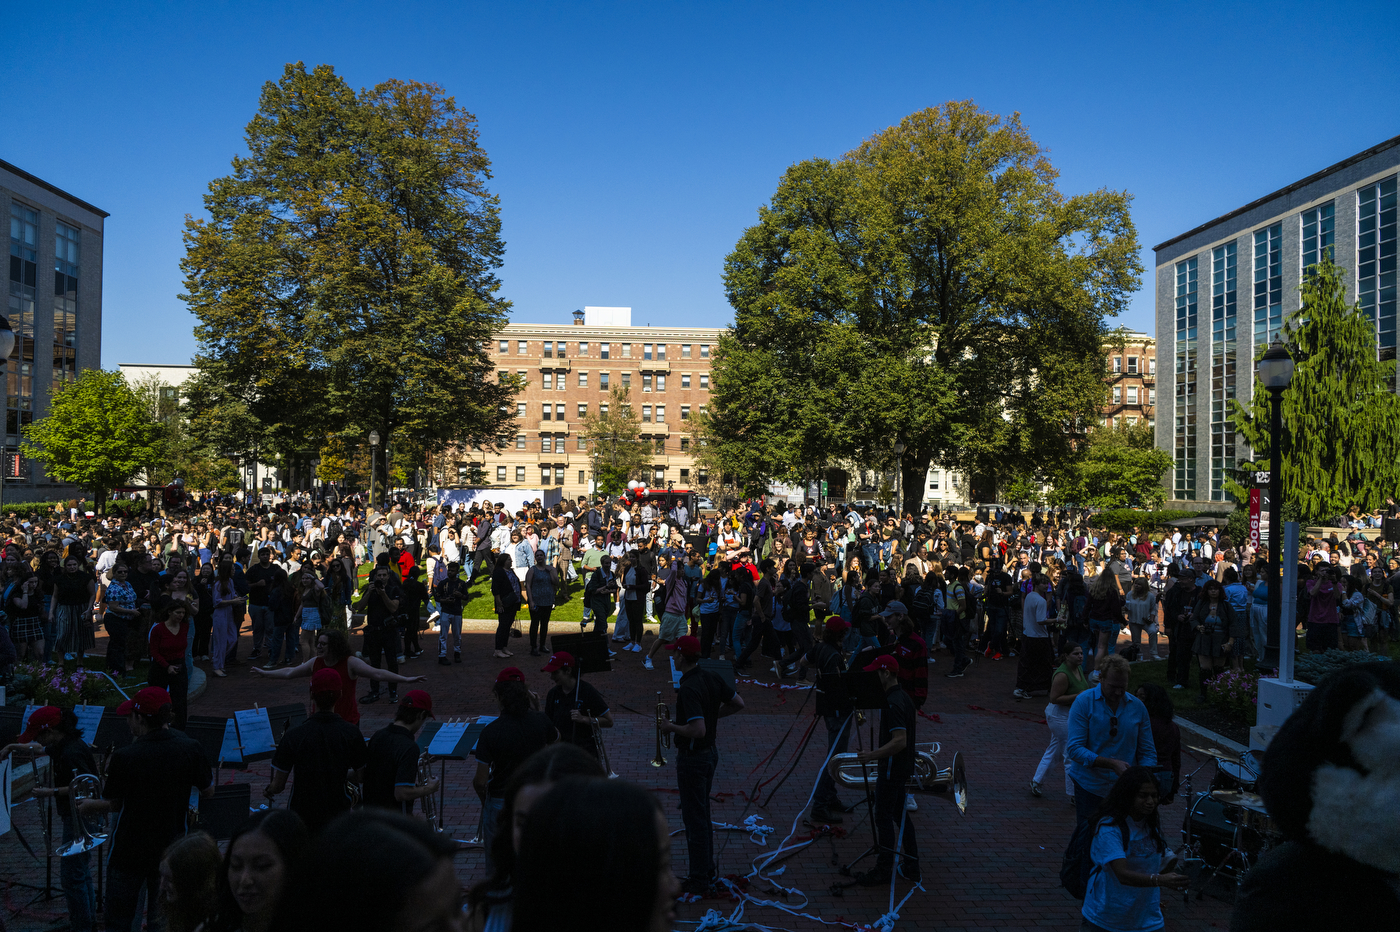 Crowds of people on campus for the 125 Founders Day celebration.